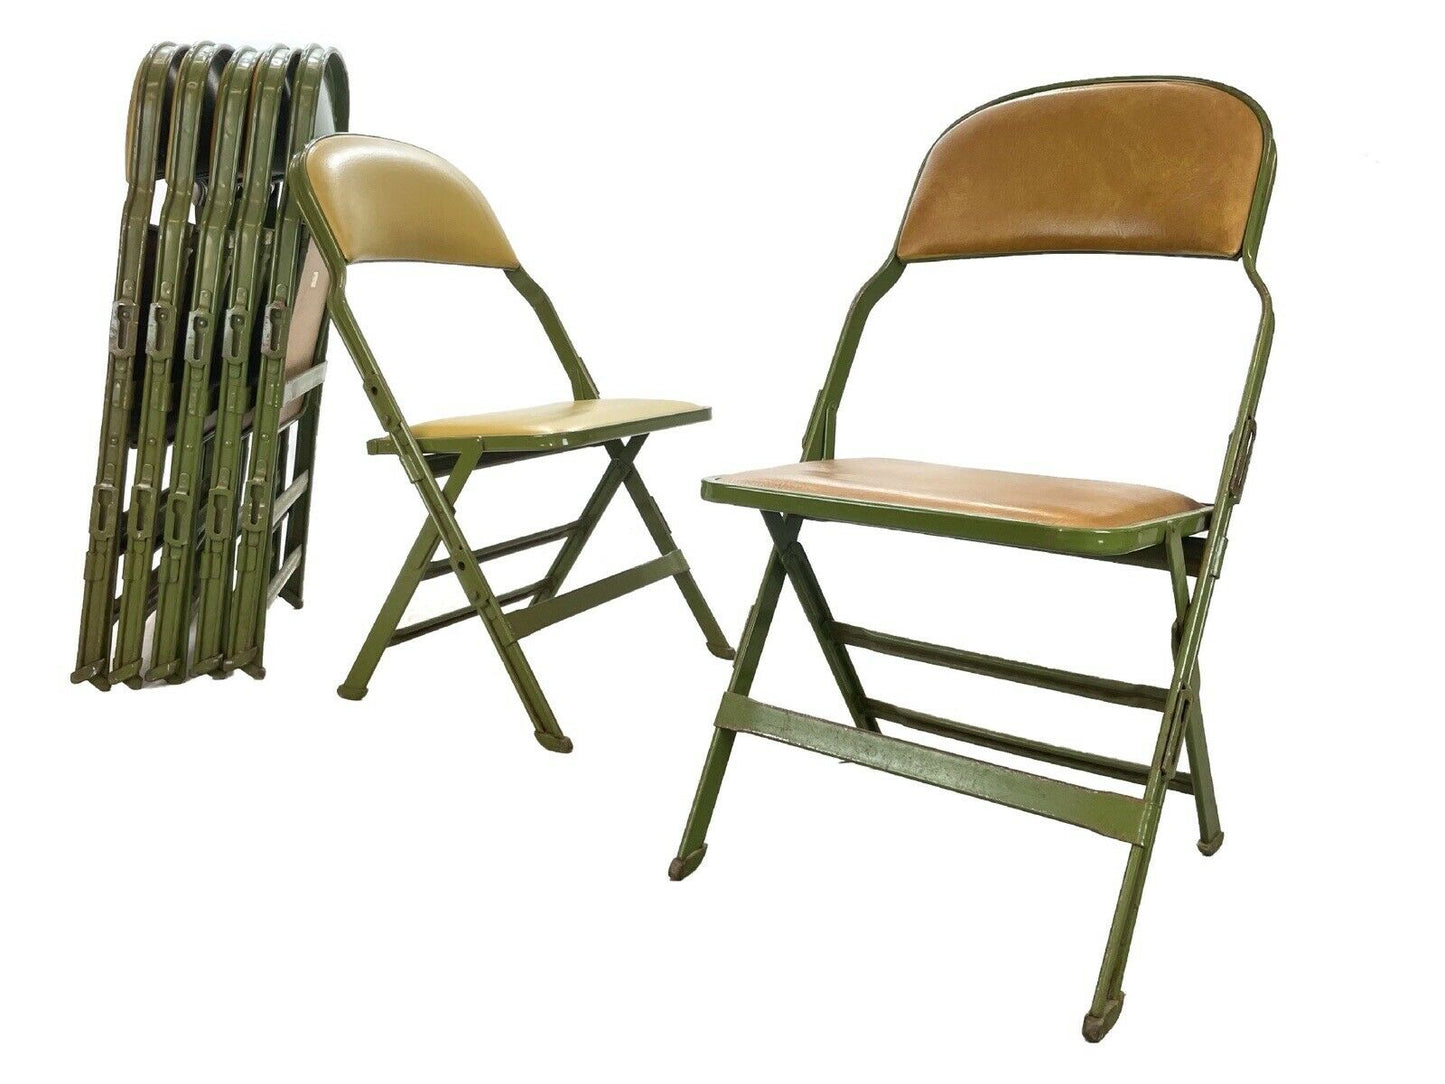 Sandler Seating -  Green Metal & Cushioned Folding Chairs - 16 Available